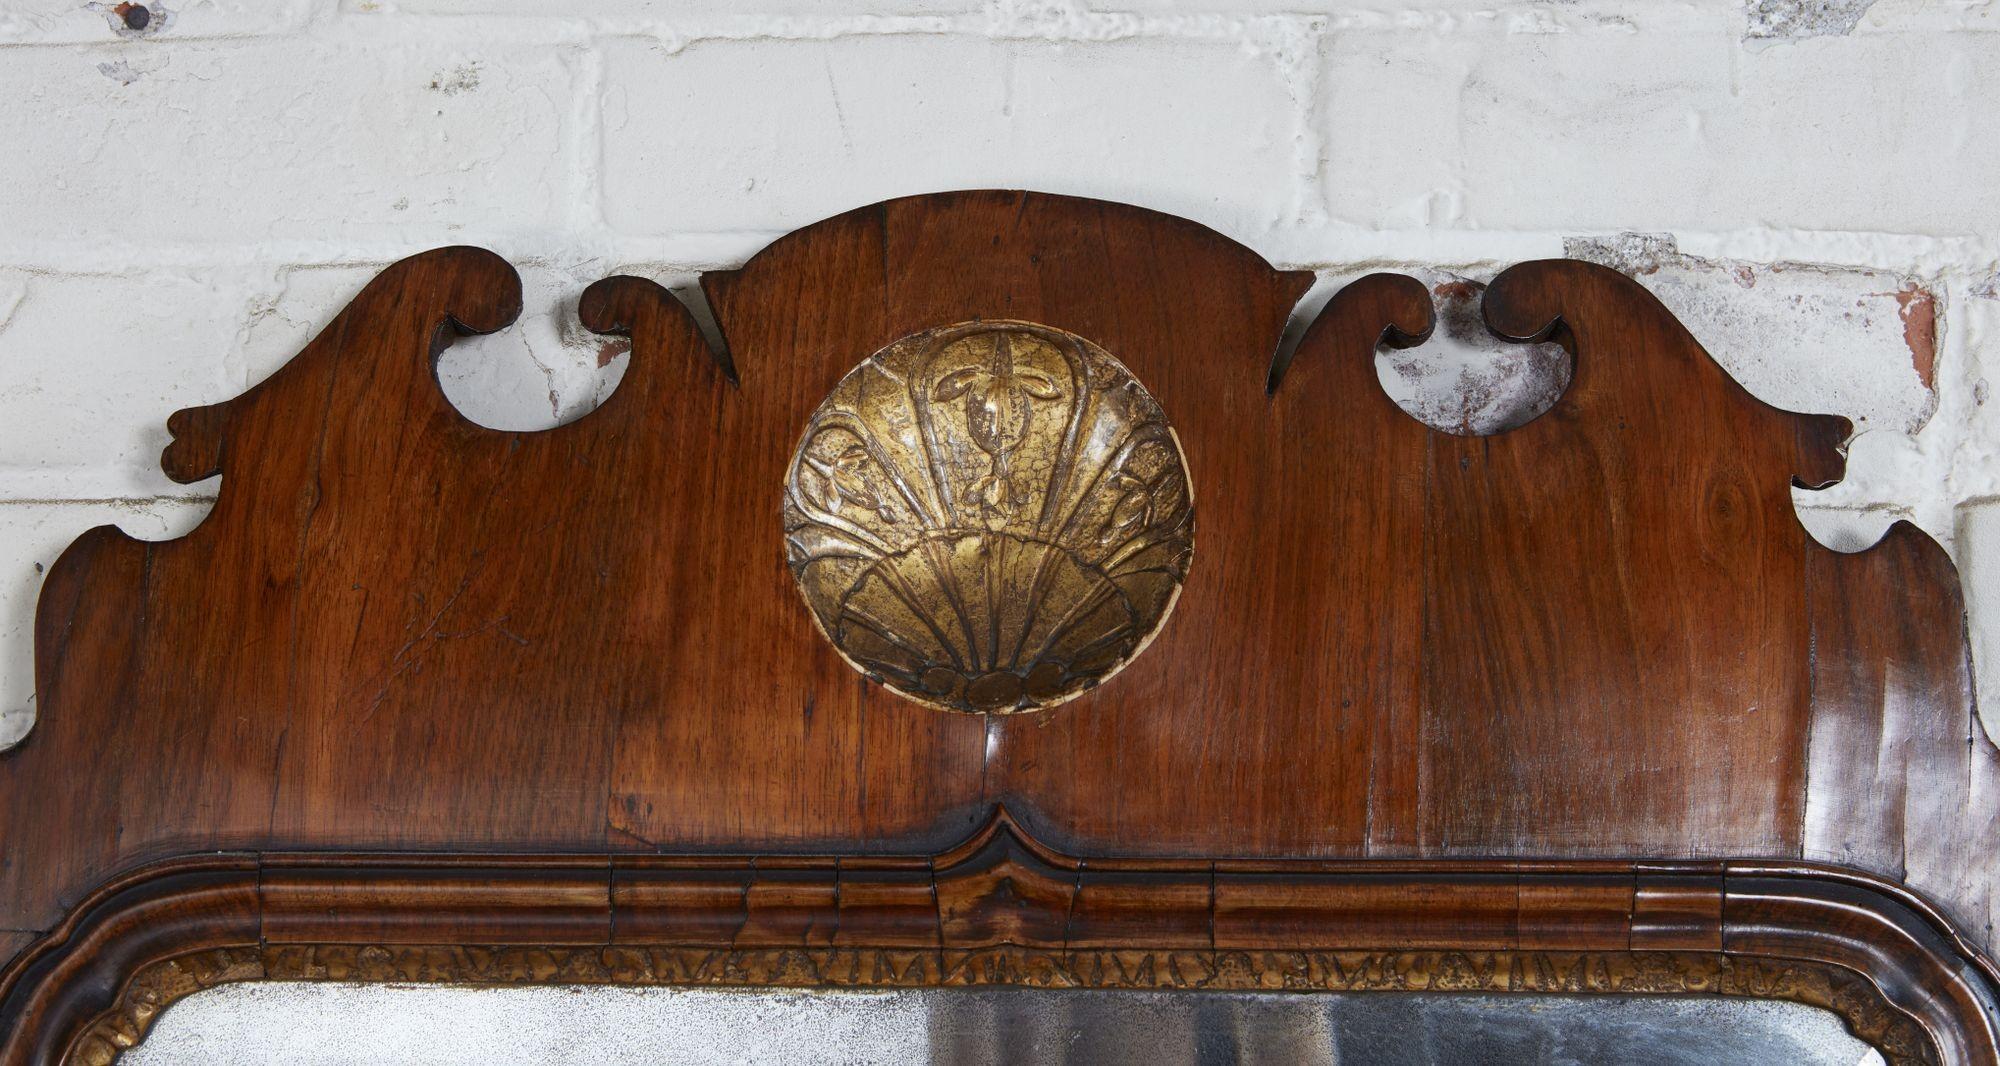 Very fine early Georgian walnut and parcel gilt mirror, the scalloped crest with inset carved gesso and gilt scallop shell over molded frame surrounding original shaped and beveled mercury glass plate, the walnut with good rich patination and the